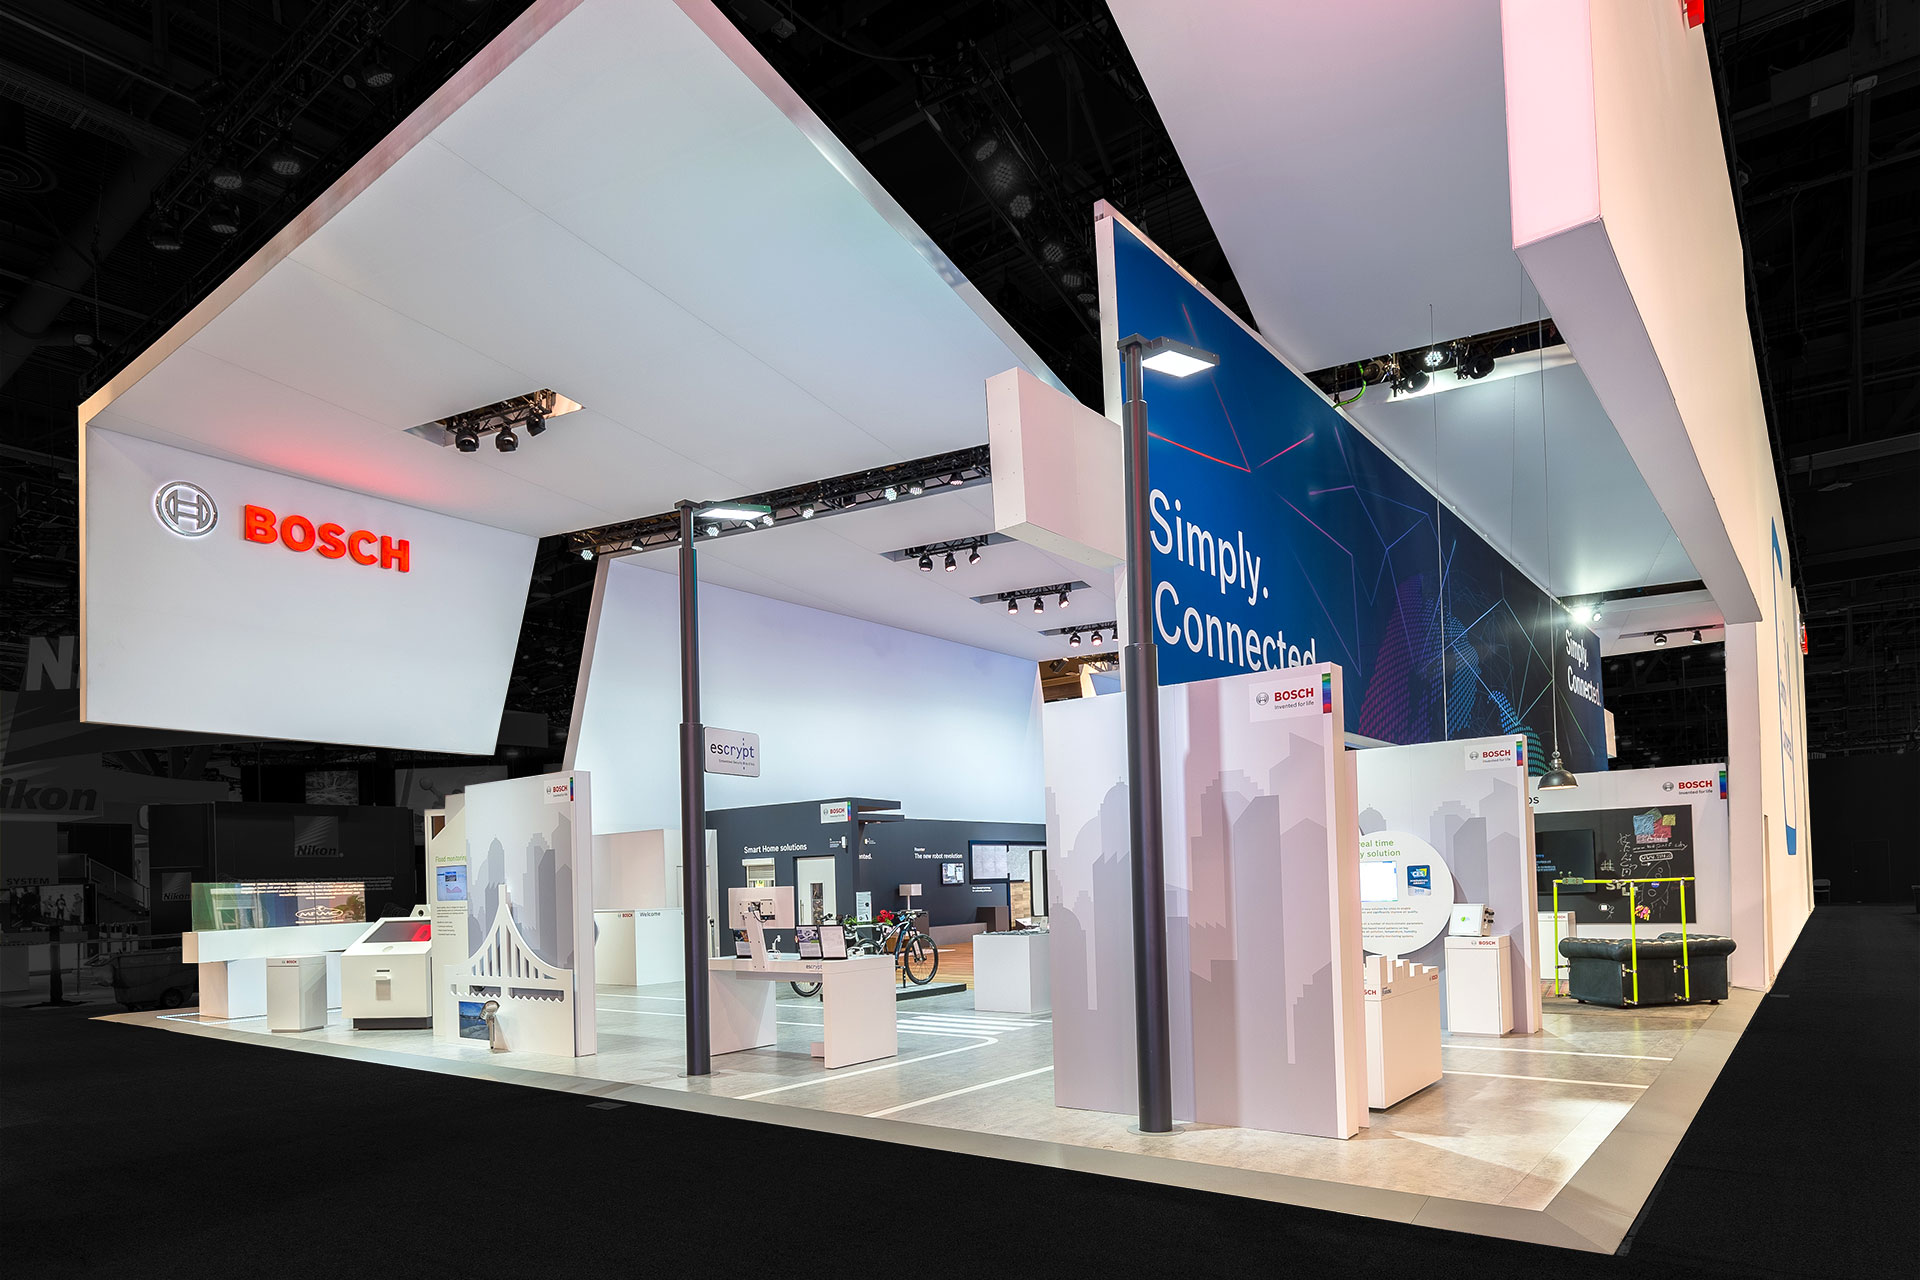 A large Bosch tradeshow exhibit made of suspended white panels and multiple kiosks with the red Bosch logo on the top left.